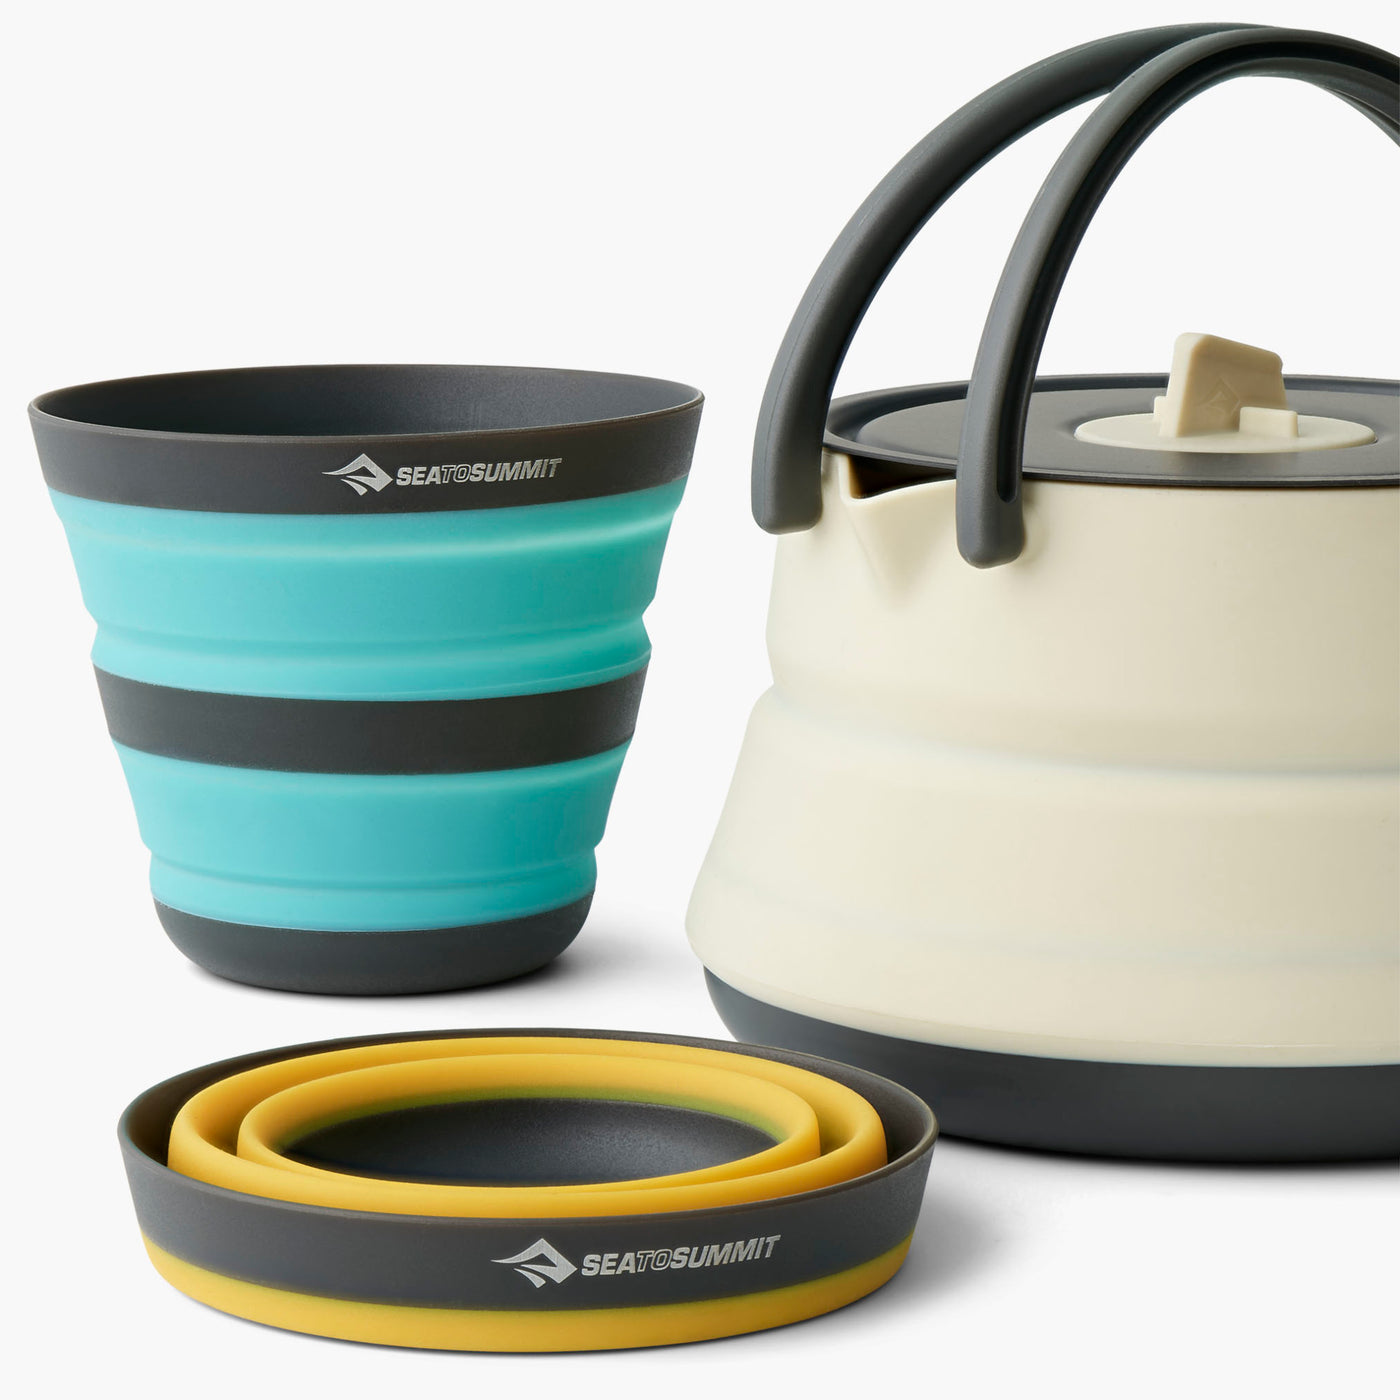 Frontier UL Collapsible Kettle Cook Set - [3 Piece]